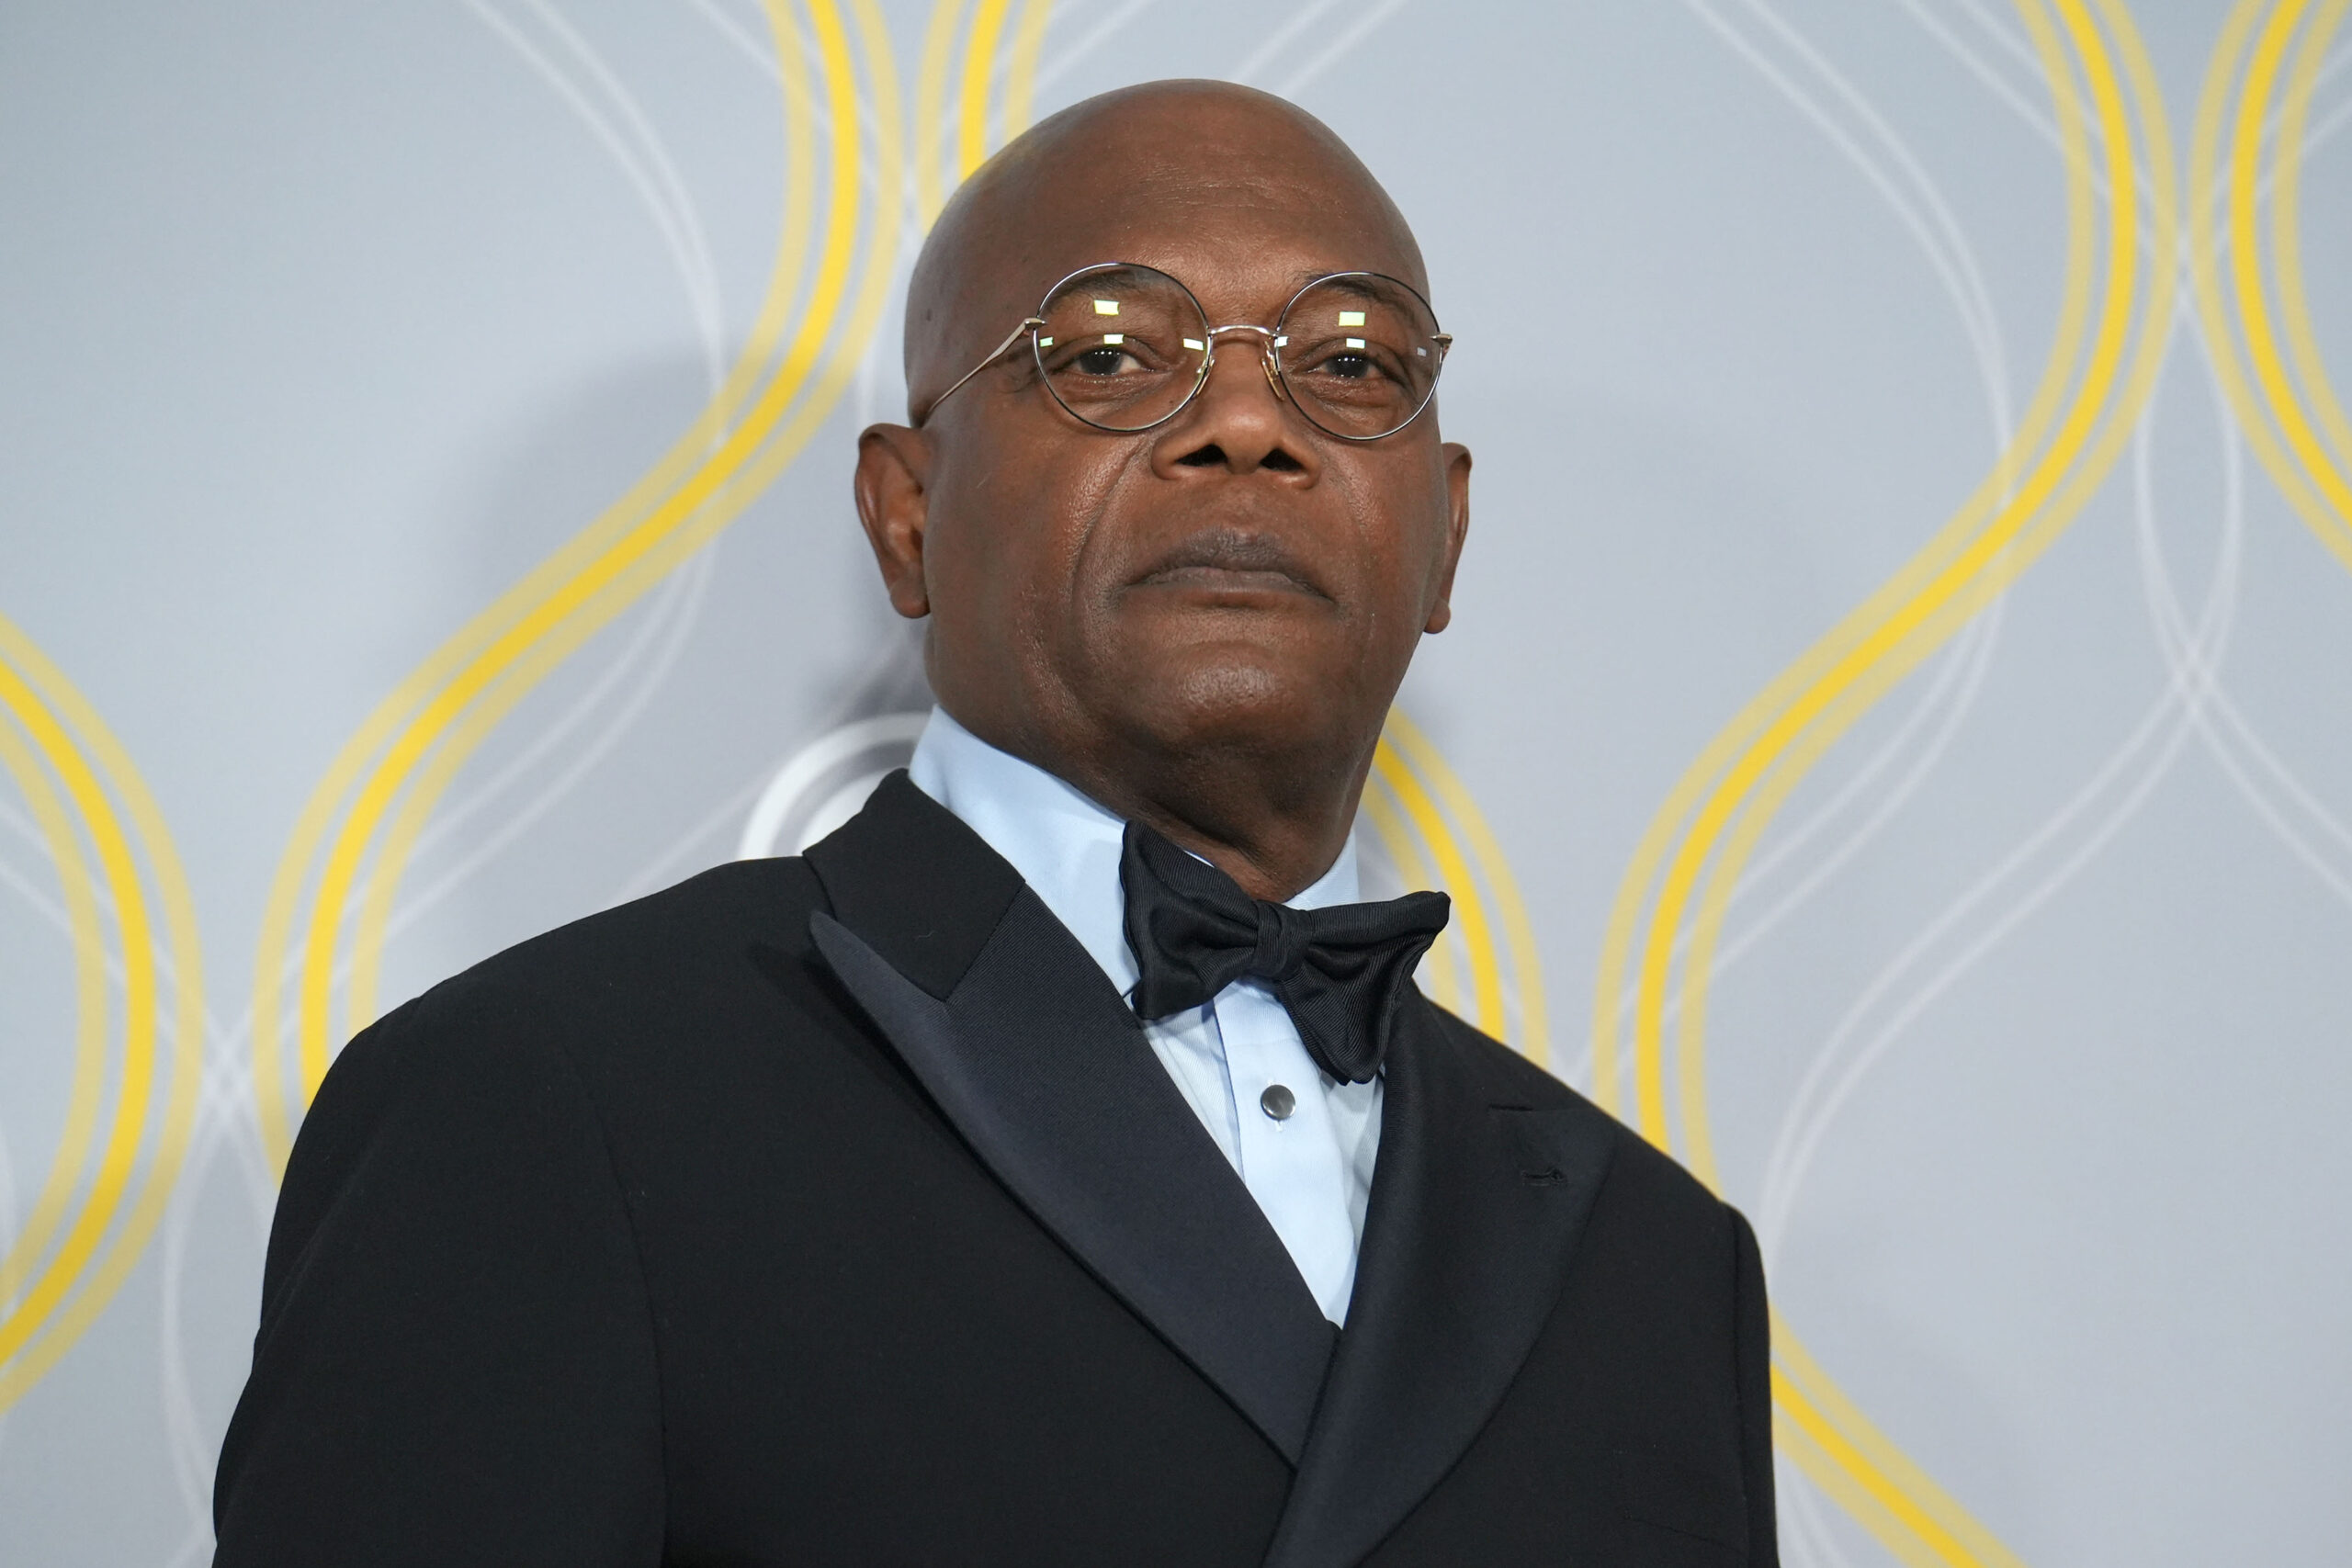 Samuel L. Jackson Shares His Thoughts on ‘Django’ Oscar Snub, Says He Will Not Do a Movie Just to Win a 'Statue'